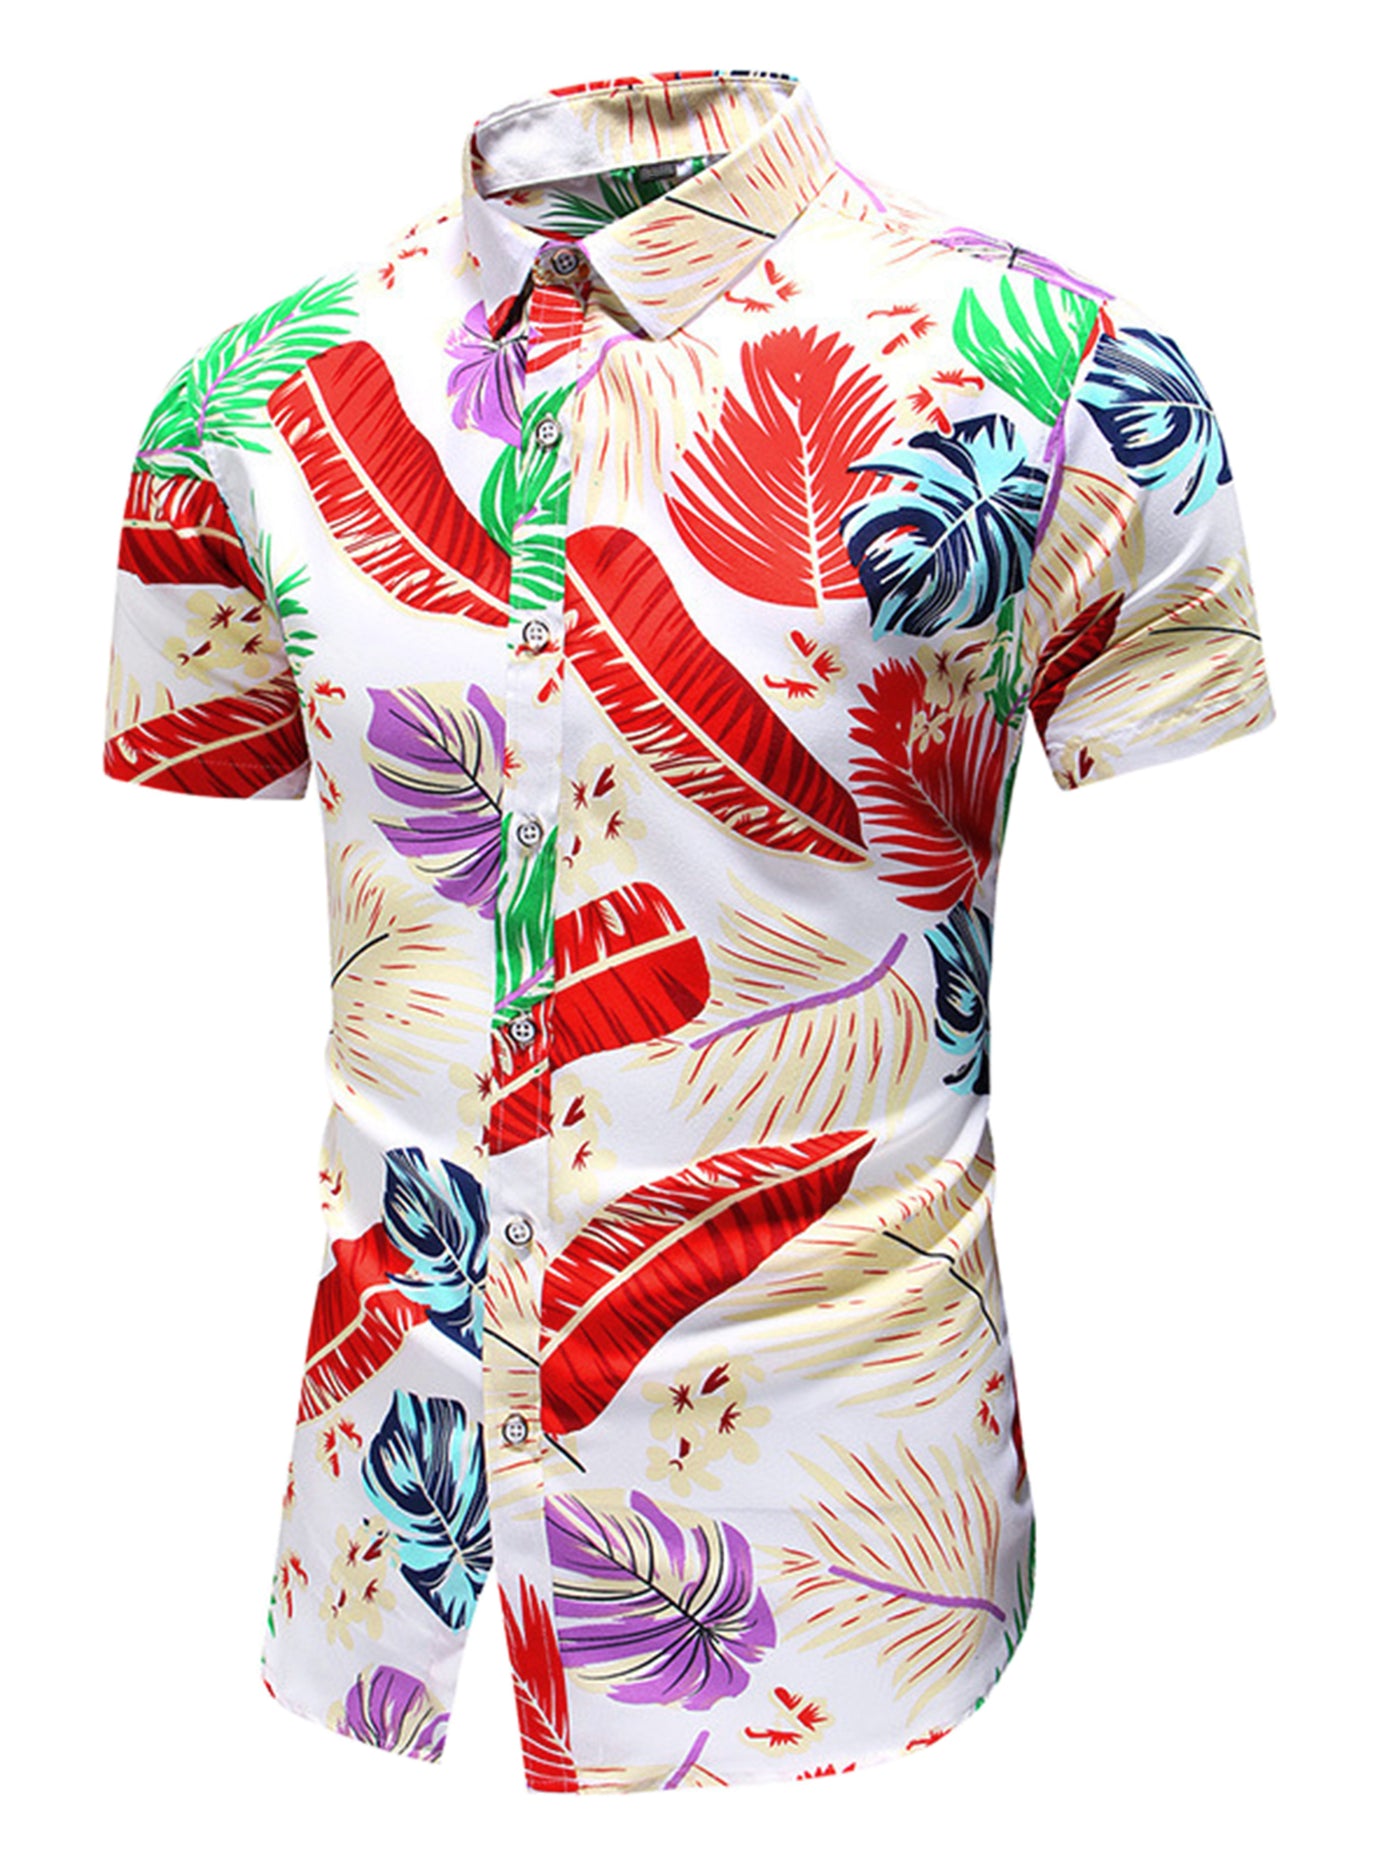 Bublédon Tropical Flowers Shirt for Men's Short Sleeves Button Down Party Floral Hawaiian Shirts